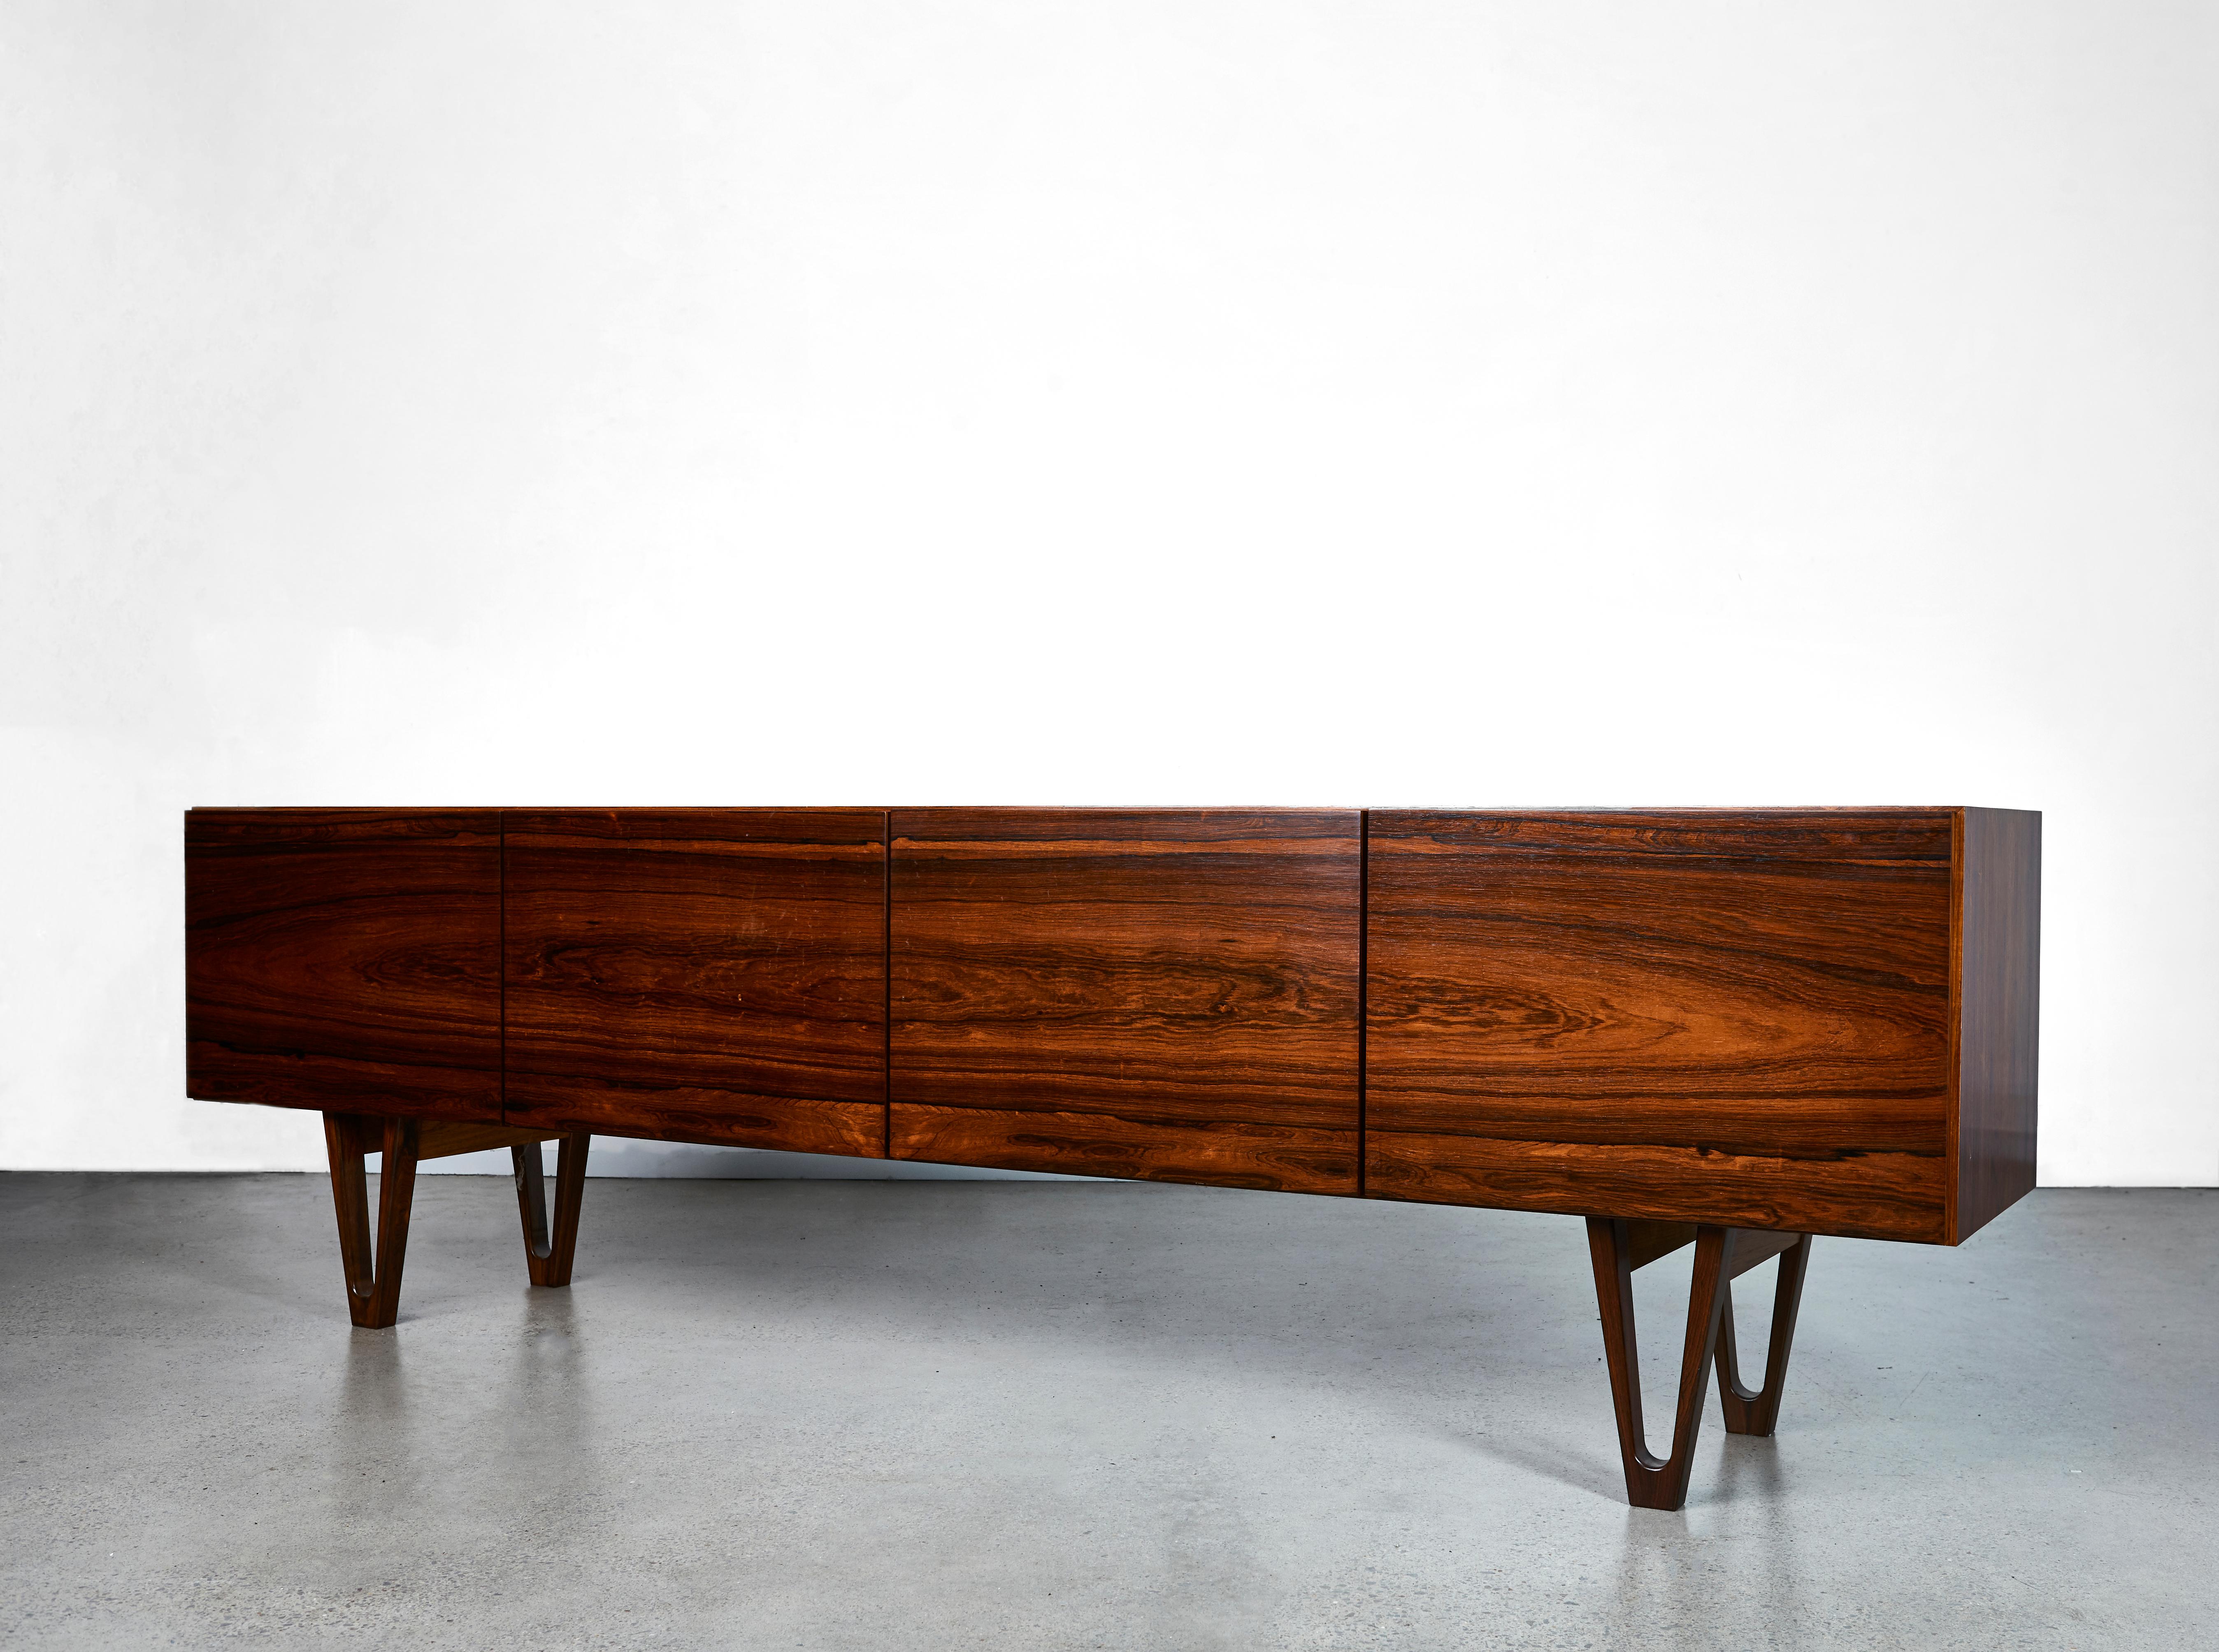 Stunning rosewood sideboard by Ib Kofod Larsen for the Swedish firm Seffle Möbelfabrik, made in the late 1950s. Low design that gives the impression that the sideboard is extra long. Beautifully sculpted legs and carefully hollowed out discreet